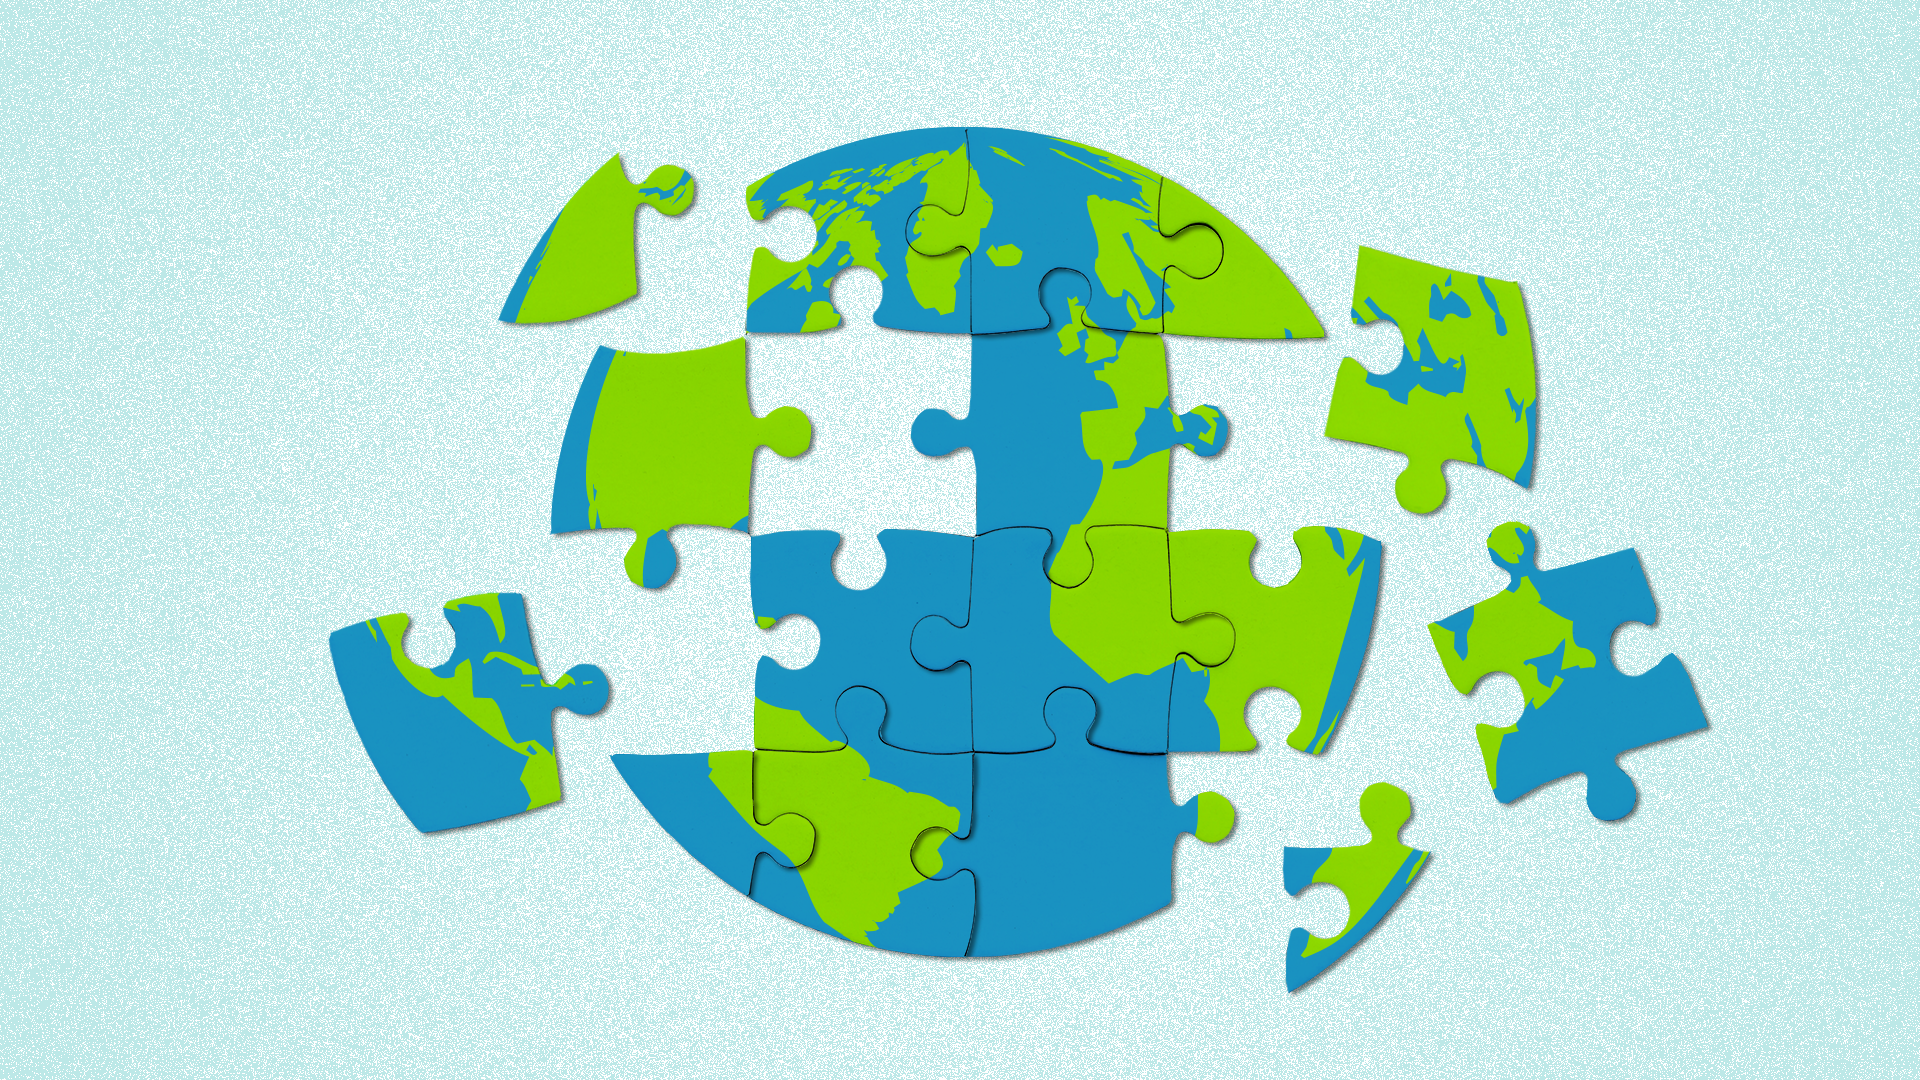 Illustration of the world as a puzzle with pieces partially put together